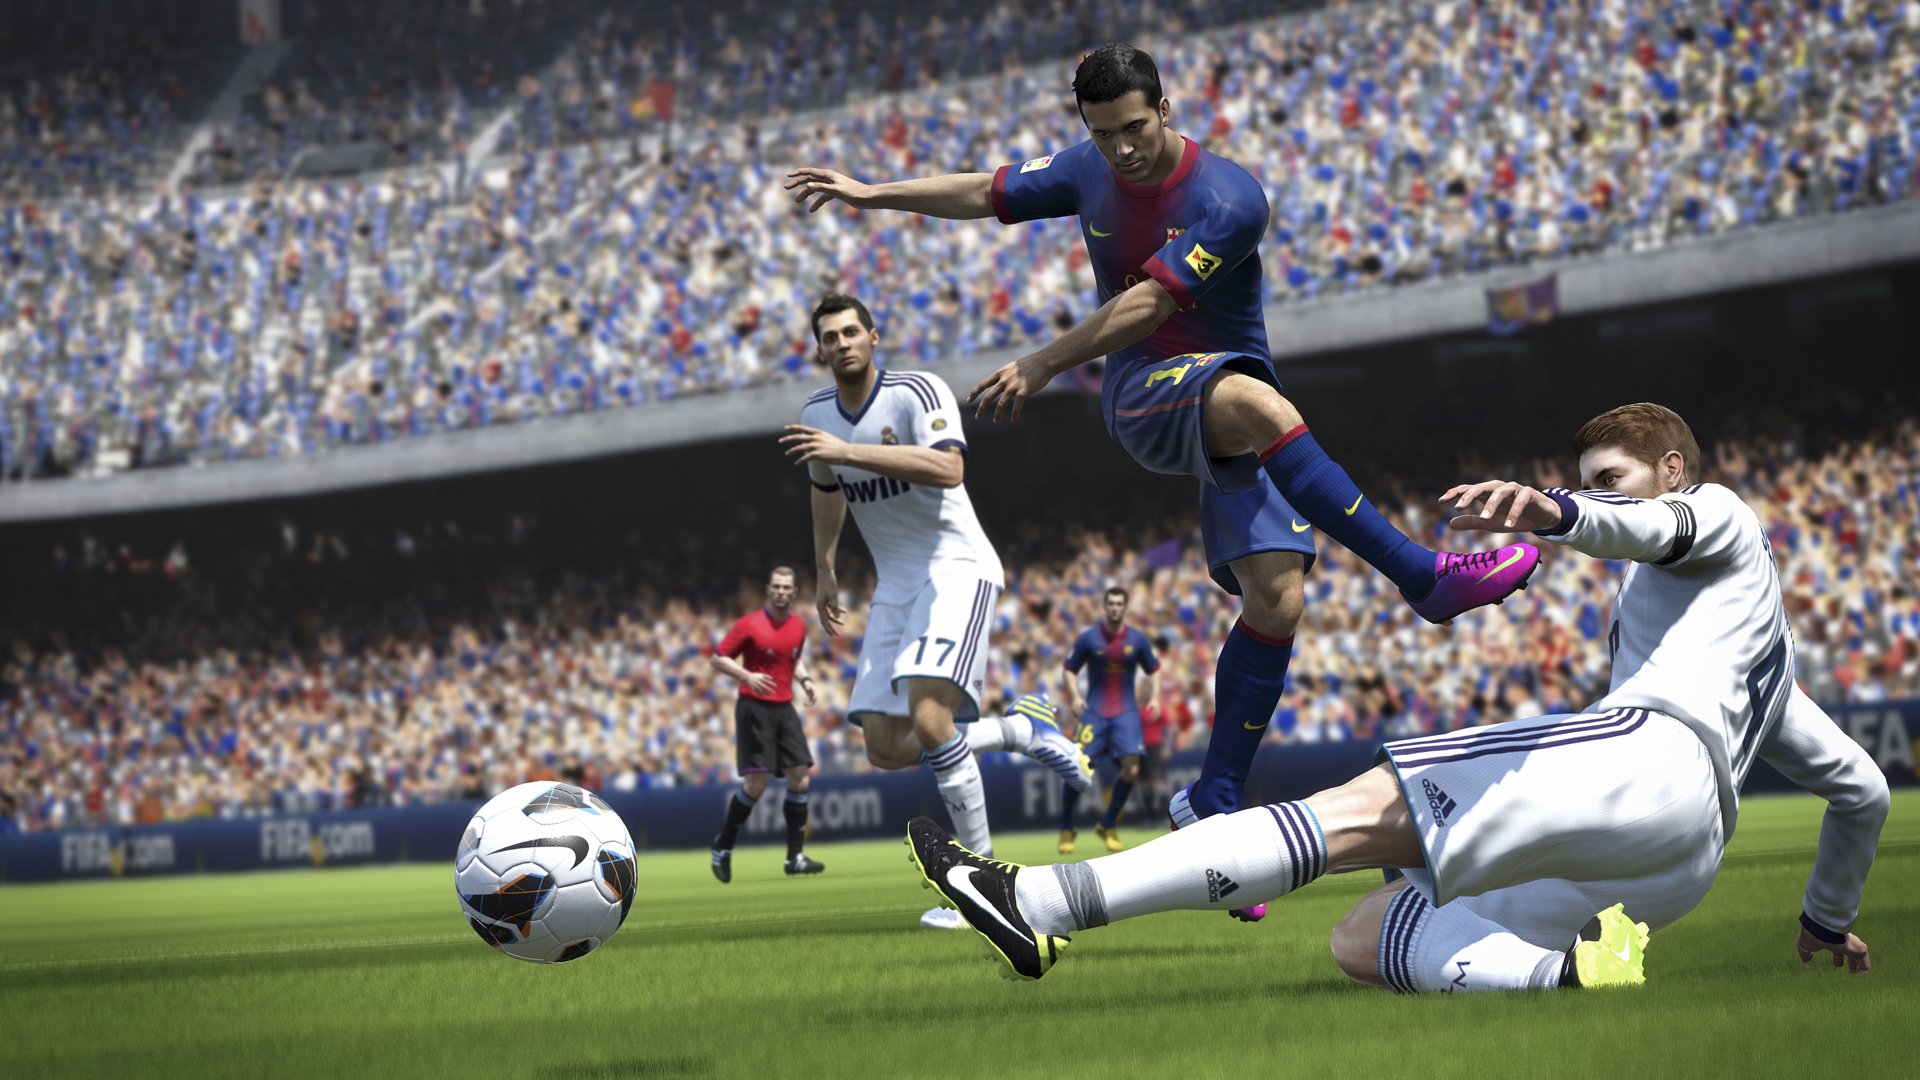 free download fifa online free